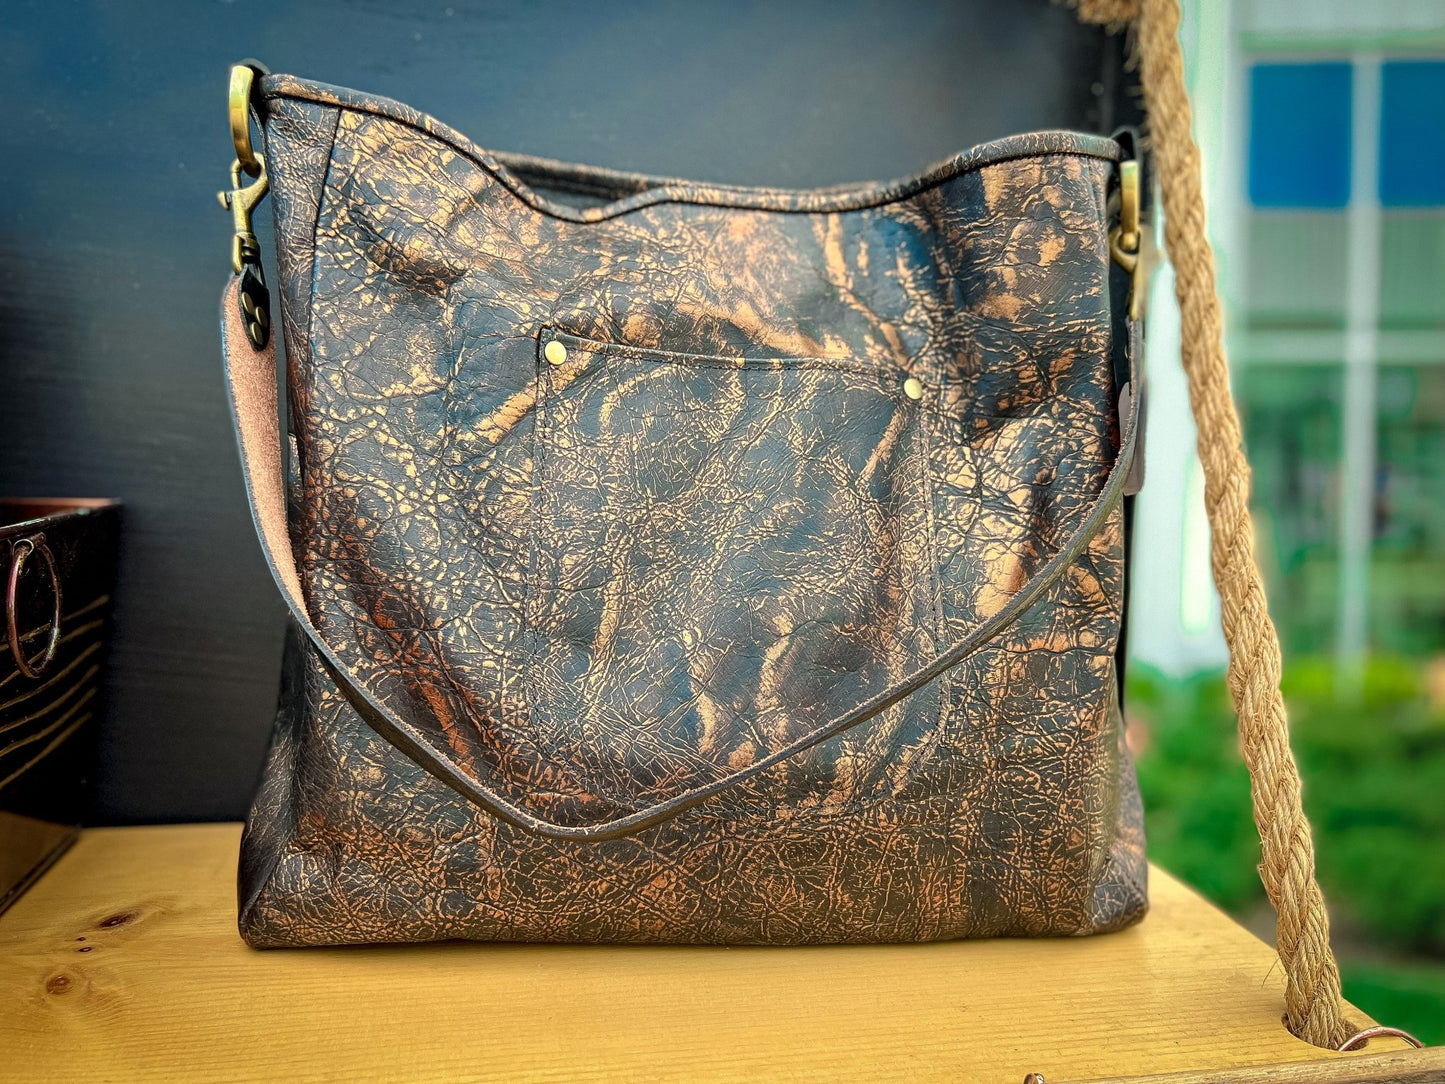 Bronze Leather Tote Bag - 9greyhorses.comBags and Wallets